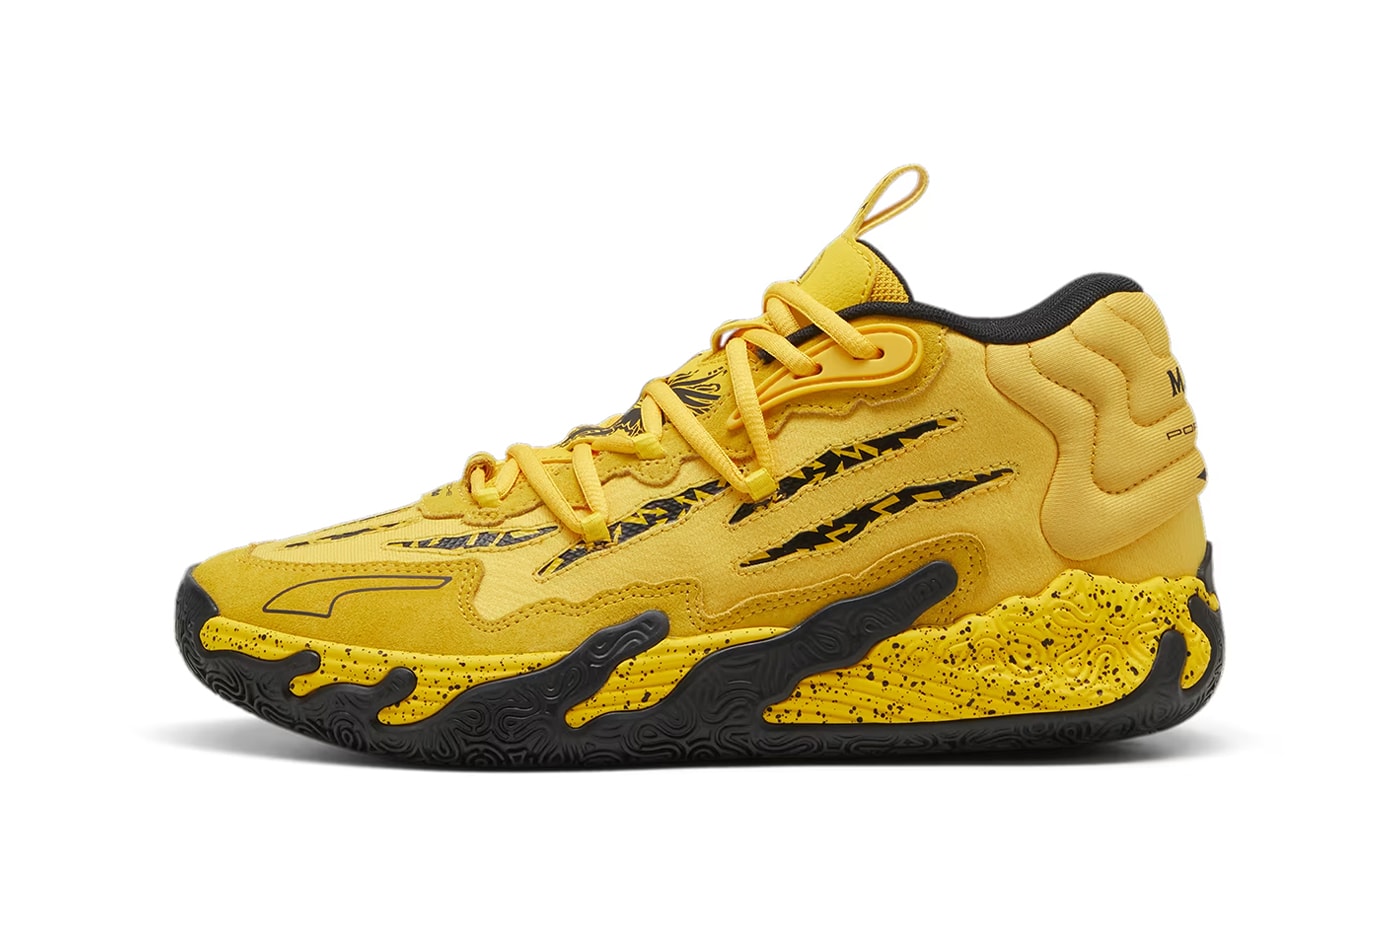 Official Look at the Porsche x PUMA MB.03 Sport Yellow/Sport Yellow-Black february release info lamelo ball